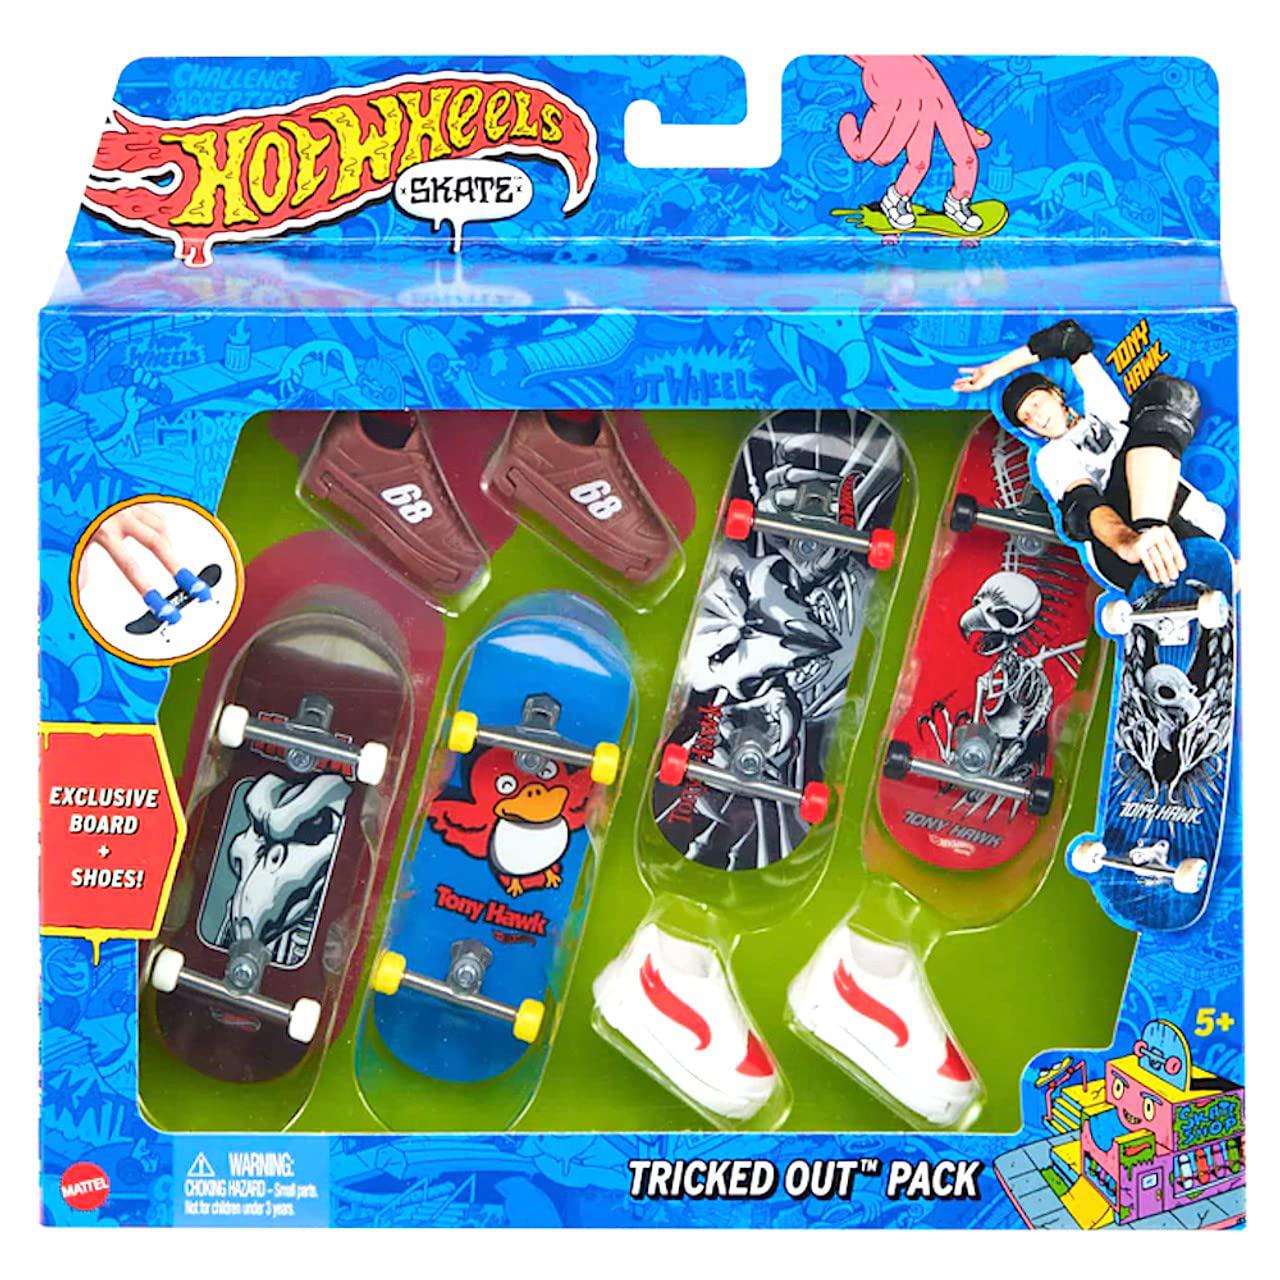 hot wheels skate - tricked out pack - exclusive board and shoes (hgt85)